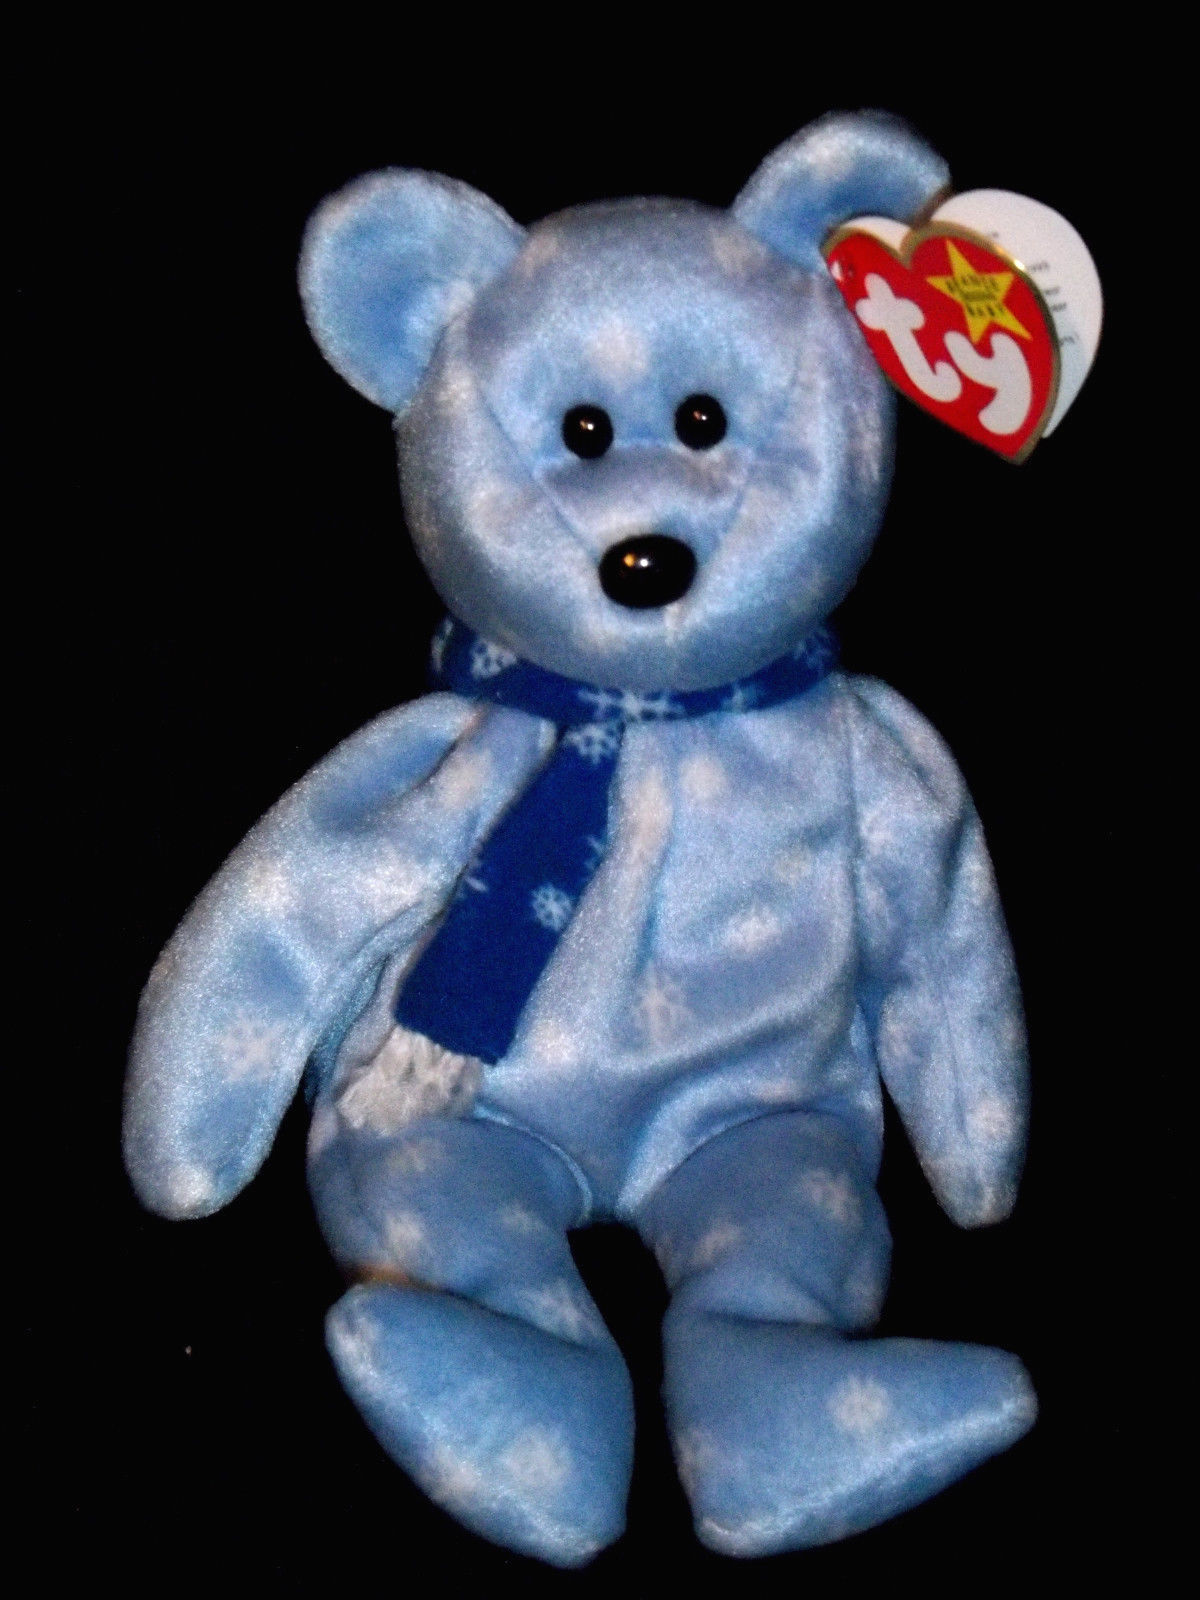 Ty Beanie Babies 1999 Holiday Teddy Bear Plush Toy Blue for sale online